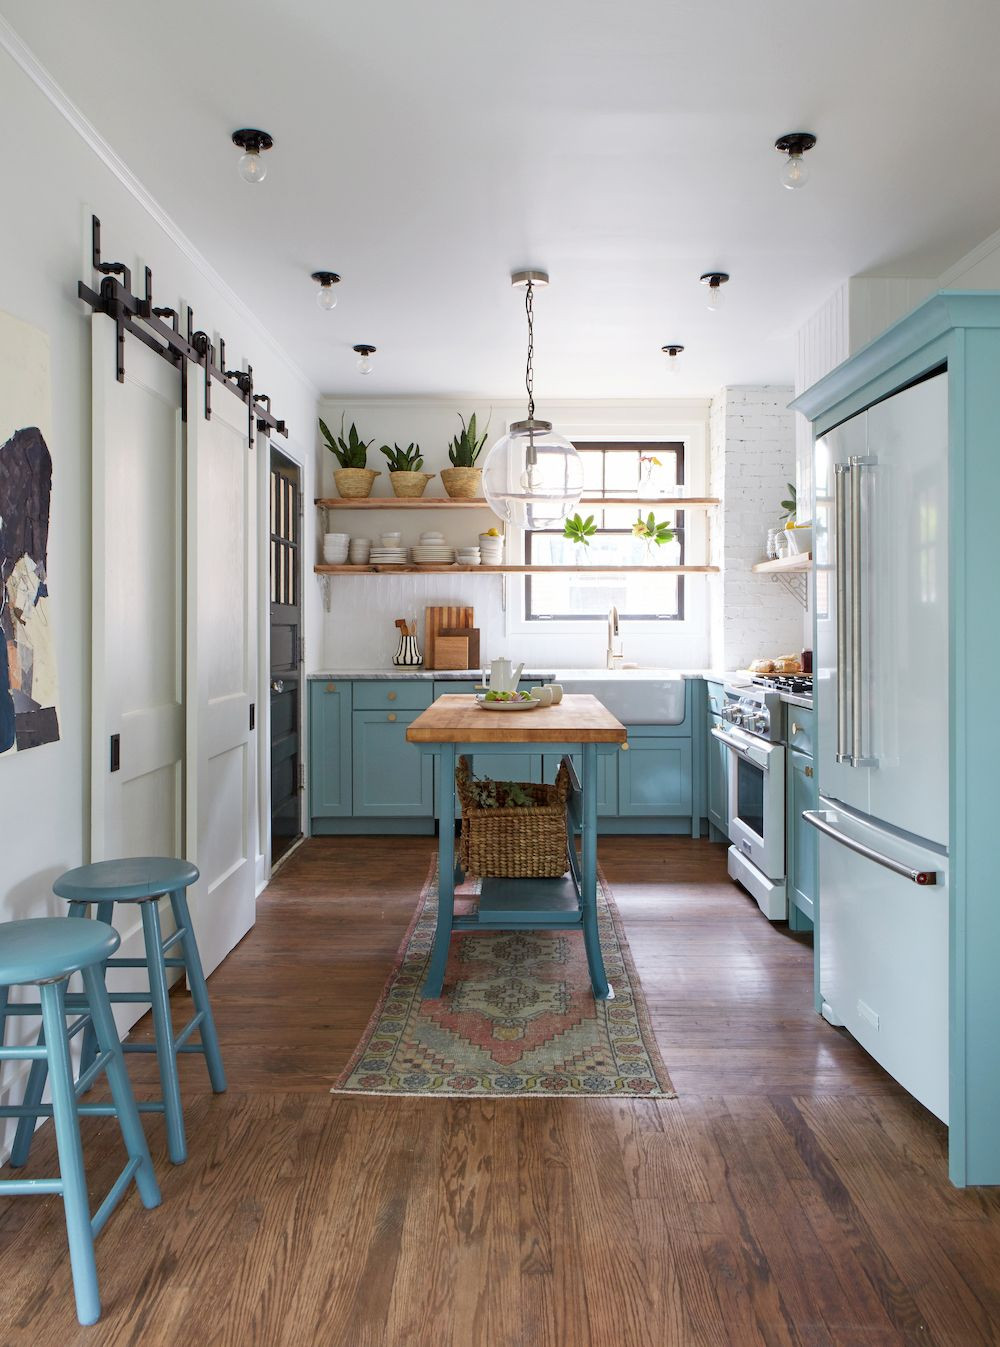 Modern Meets Rustic In These Perfectly Balanced Farmhouse Kitchens